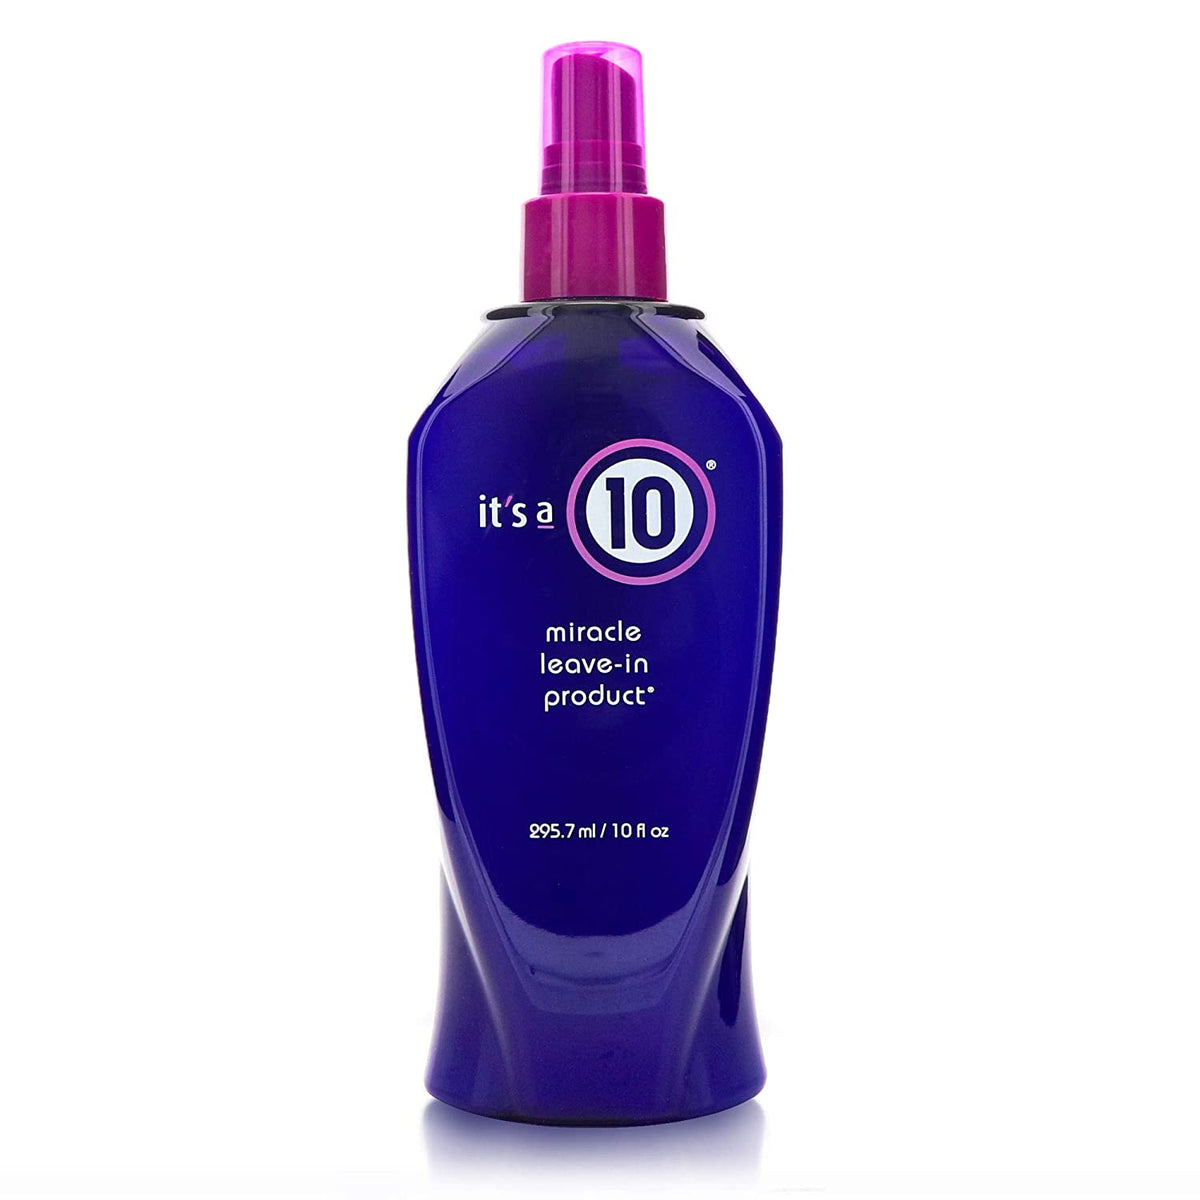 IT'S A 10 MIRACLE LEAVE-IN PRODUCT 10 OZ